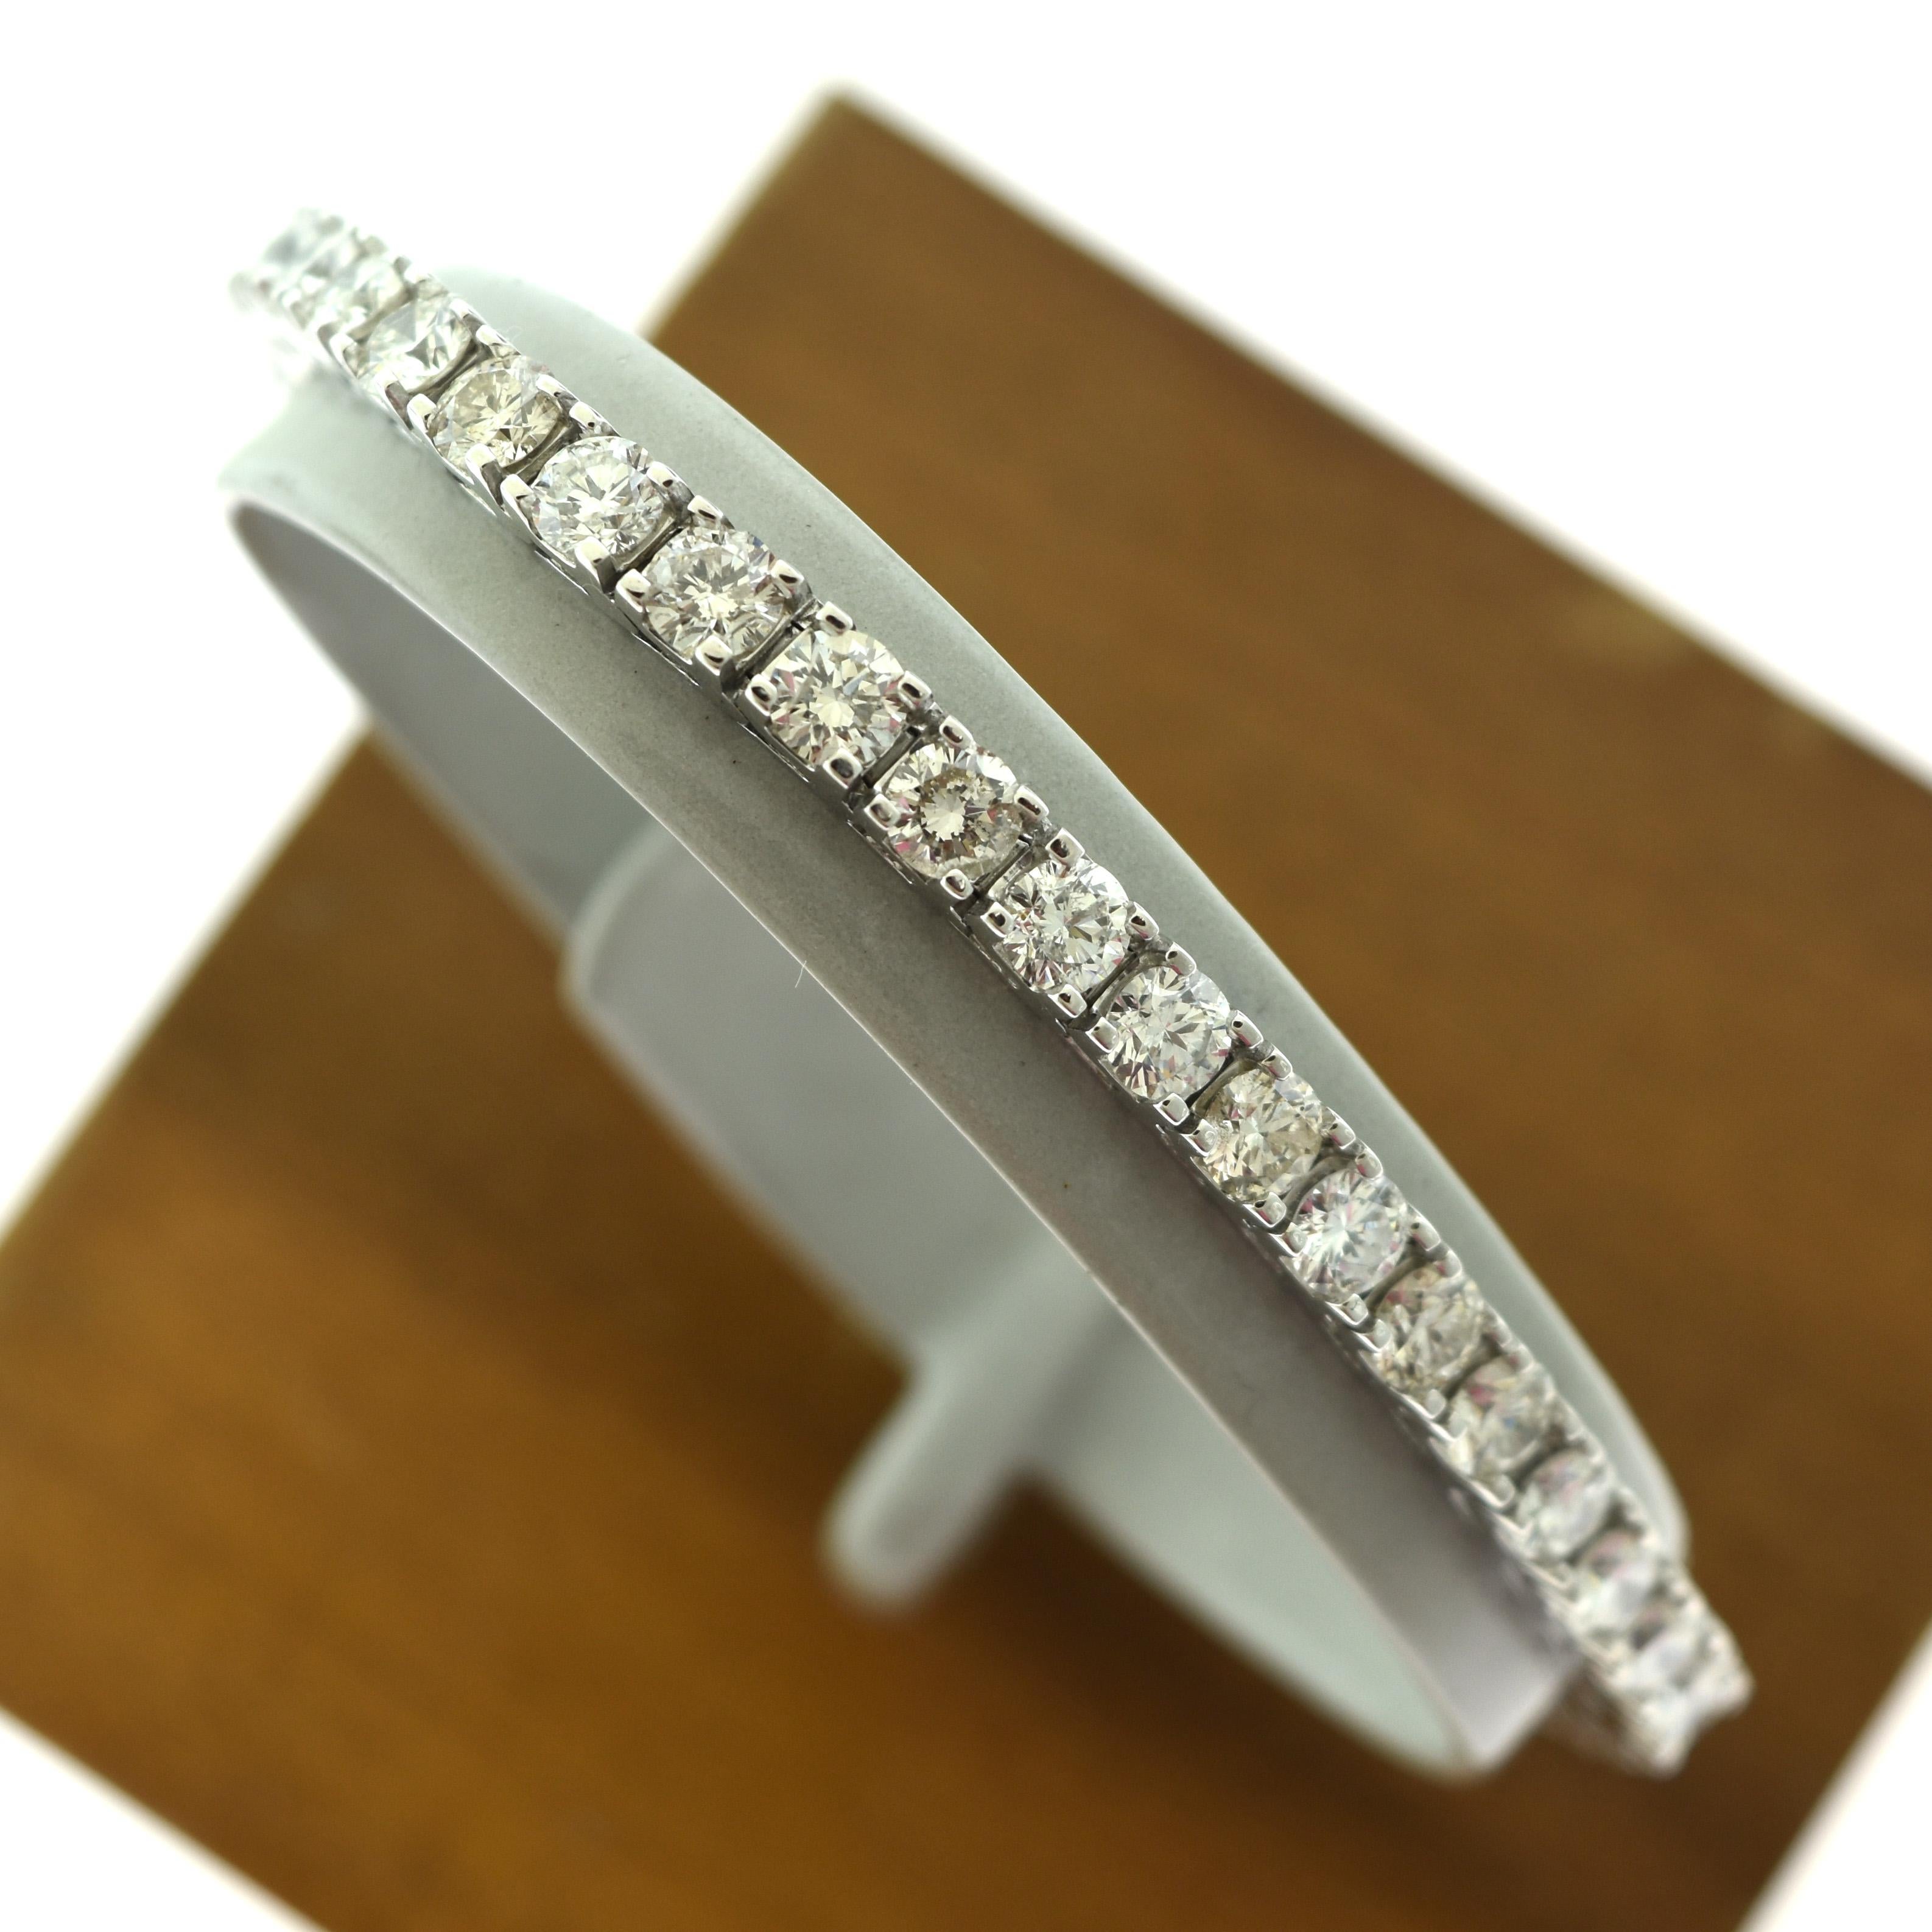 Brilliance Jewels, Miami
Questions? Call Us Anytime!
786,482,8100

Style: Tennis Bracelet

Metal: White Gold 

Metal Purity: 14k ​​

Stone:  42 Round Brilliant Cut Diamonds 

Diamond Color: G-H

Diamond Clarity: SI

Total Carat Weight: approx. 8